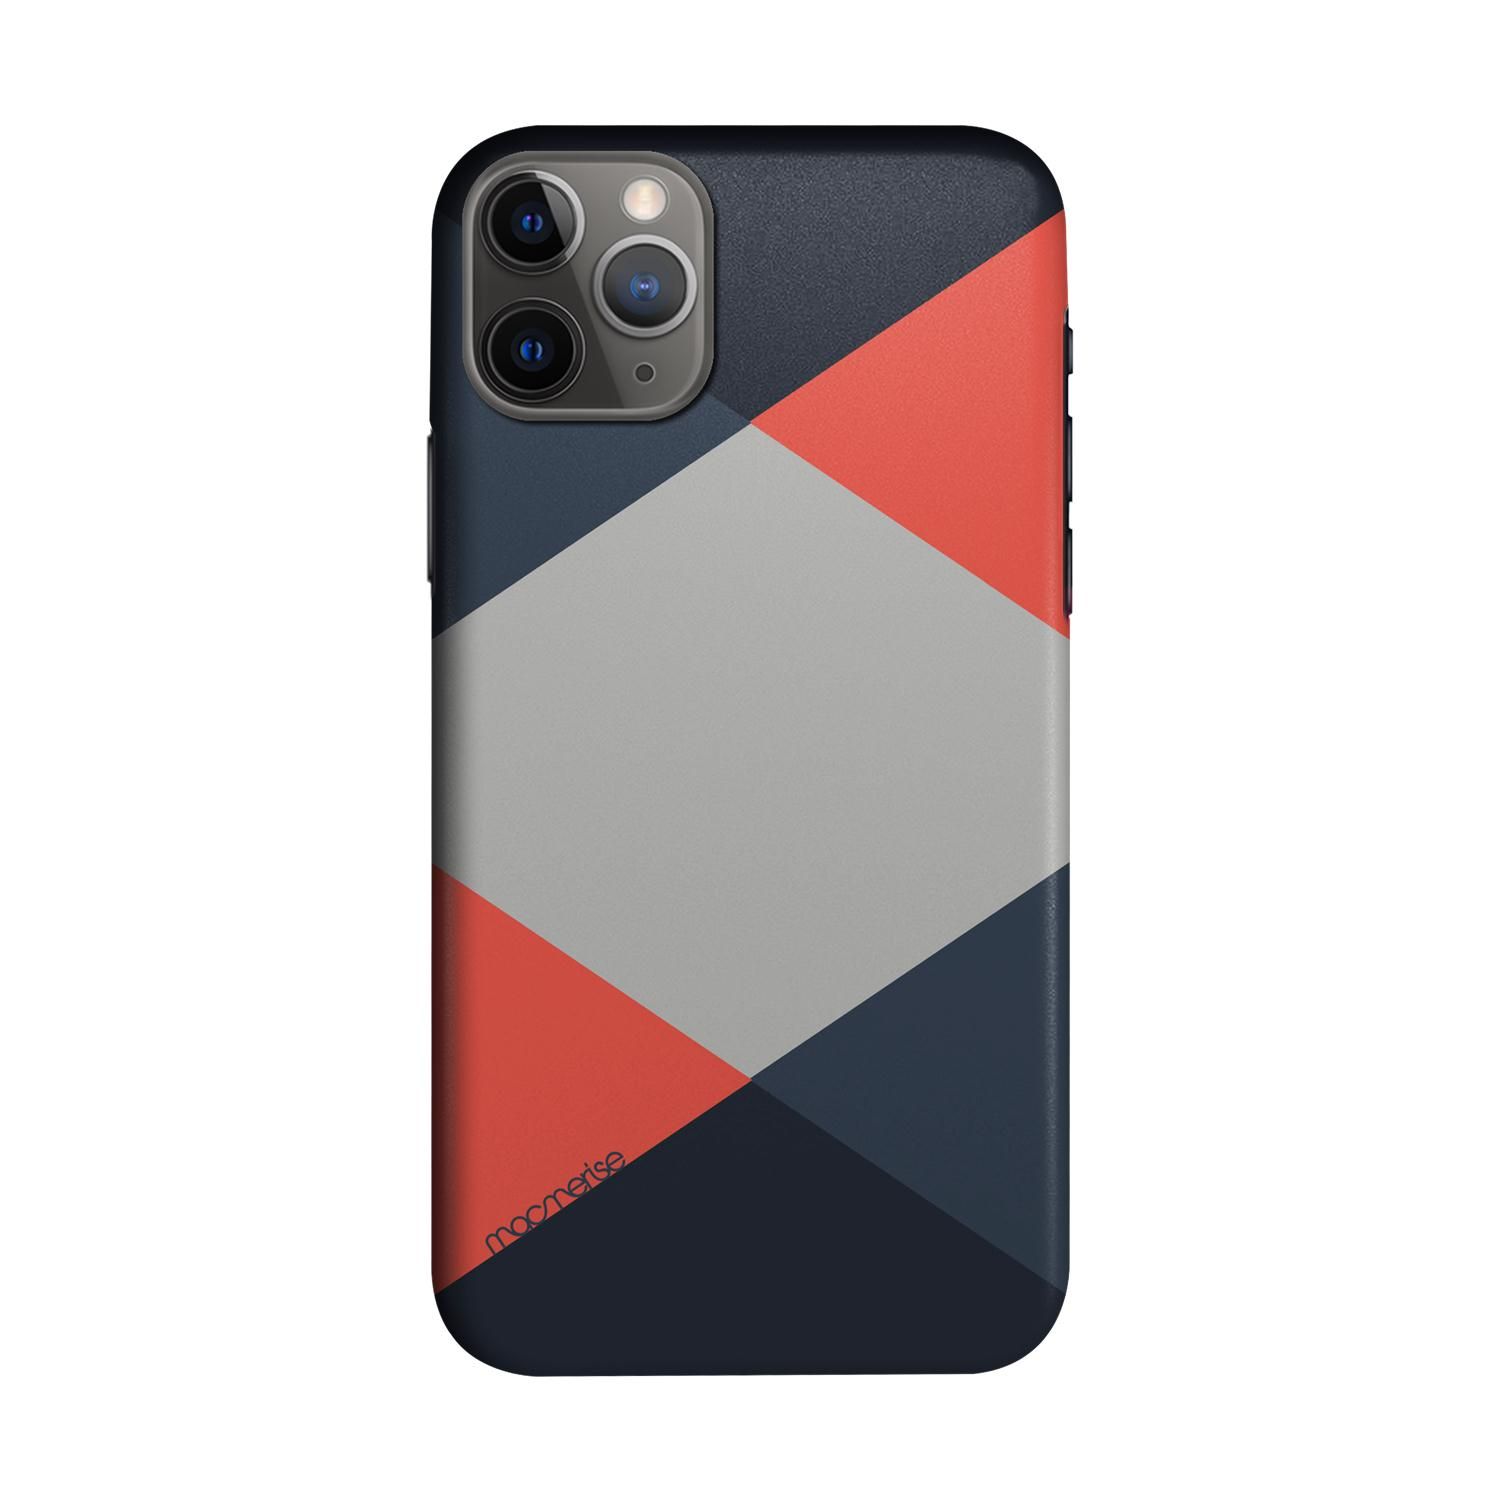 Buy Criss Cross Coral - Sleek Phone Case for iPhone 11 Pro Max Online